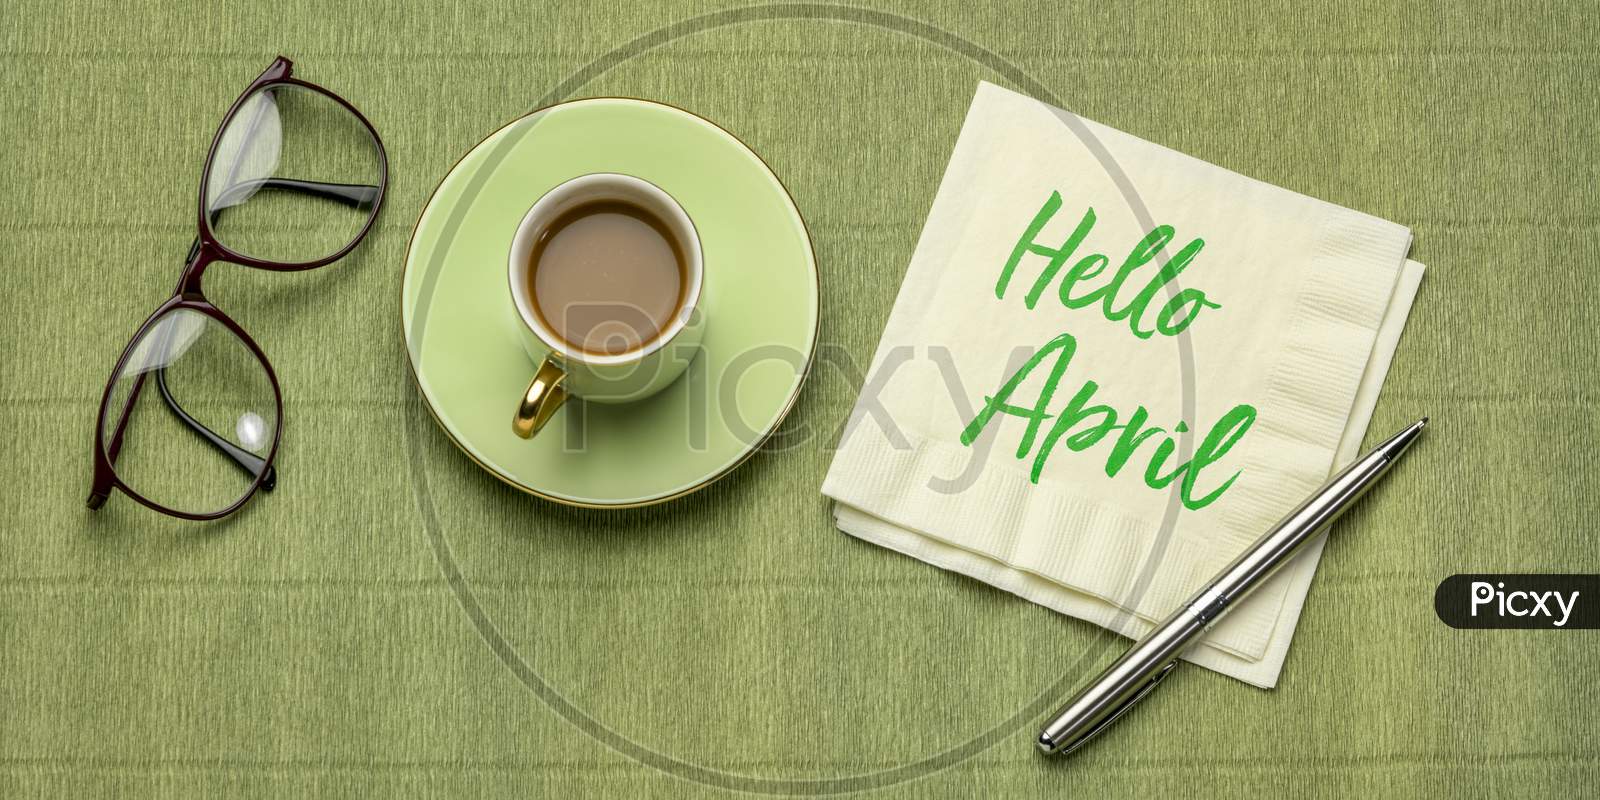 Hello April - Handwriting On A Napkin, Desktop Flat Lay With A Cup Of Coffee And Reading Glasses